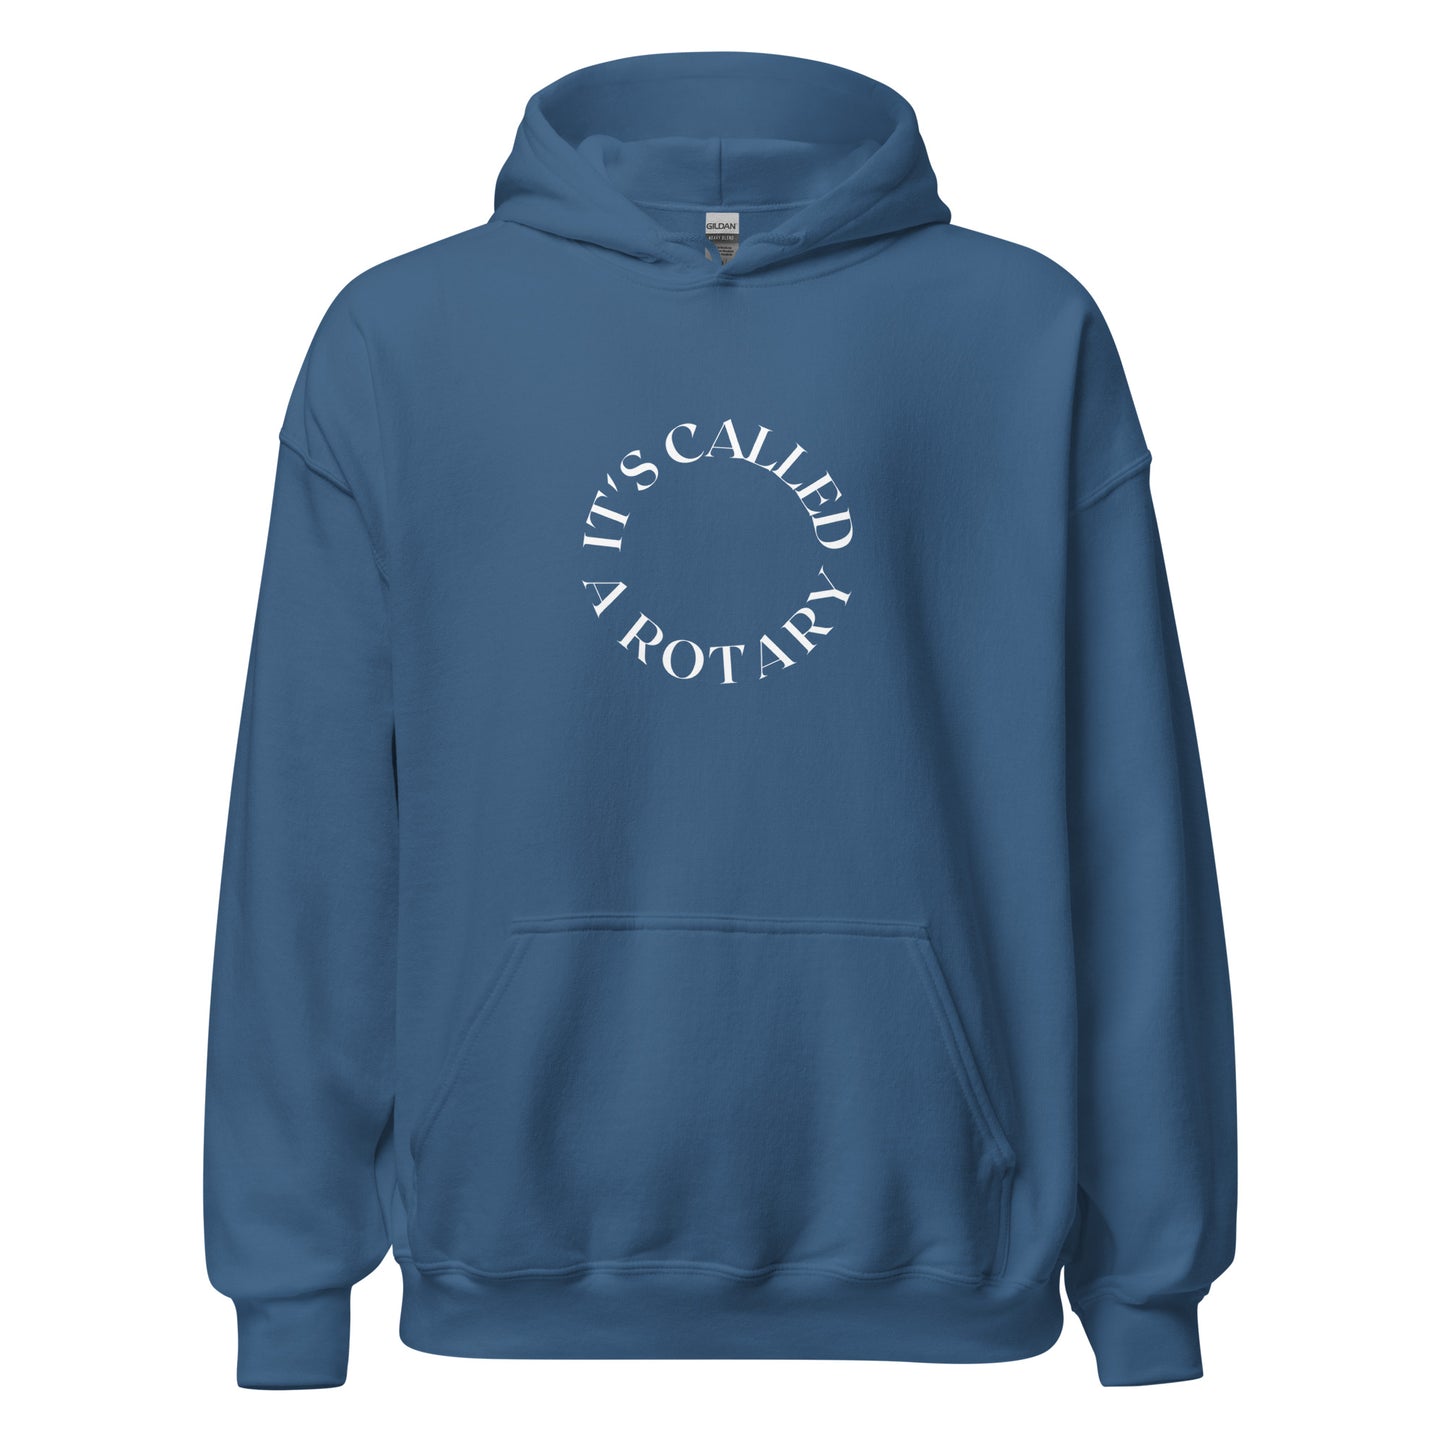 indigo hoodie that saying "it's called a rotary" in white lettering shaped in a circle